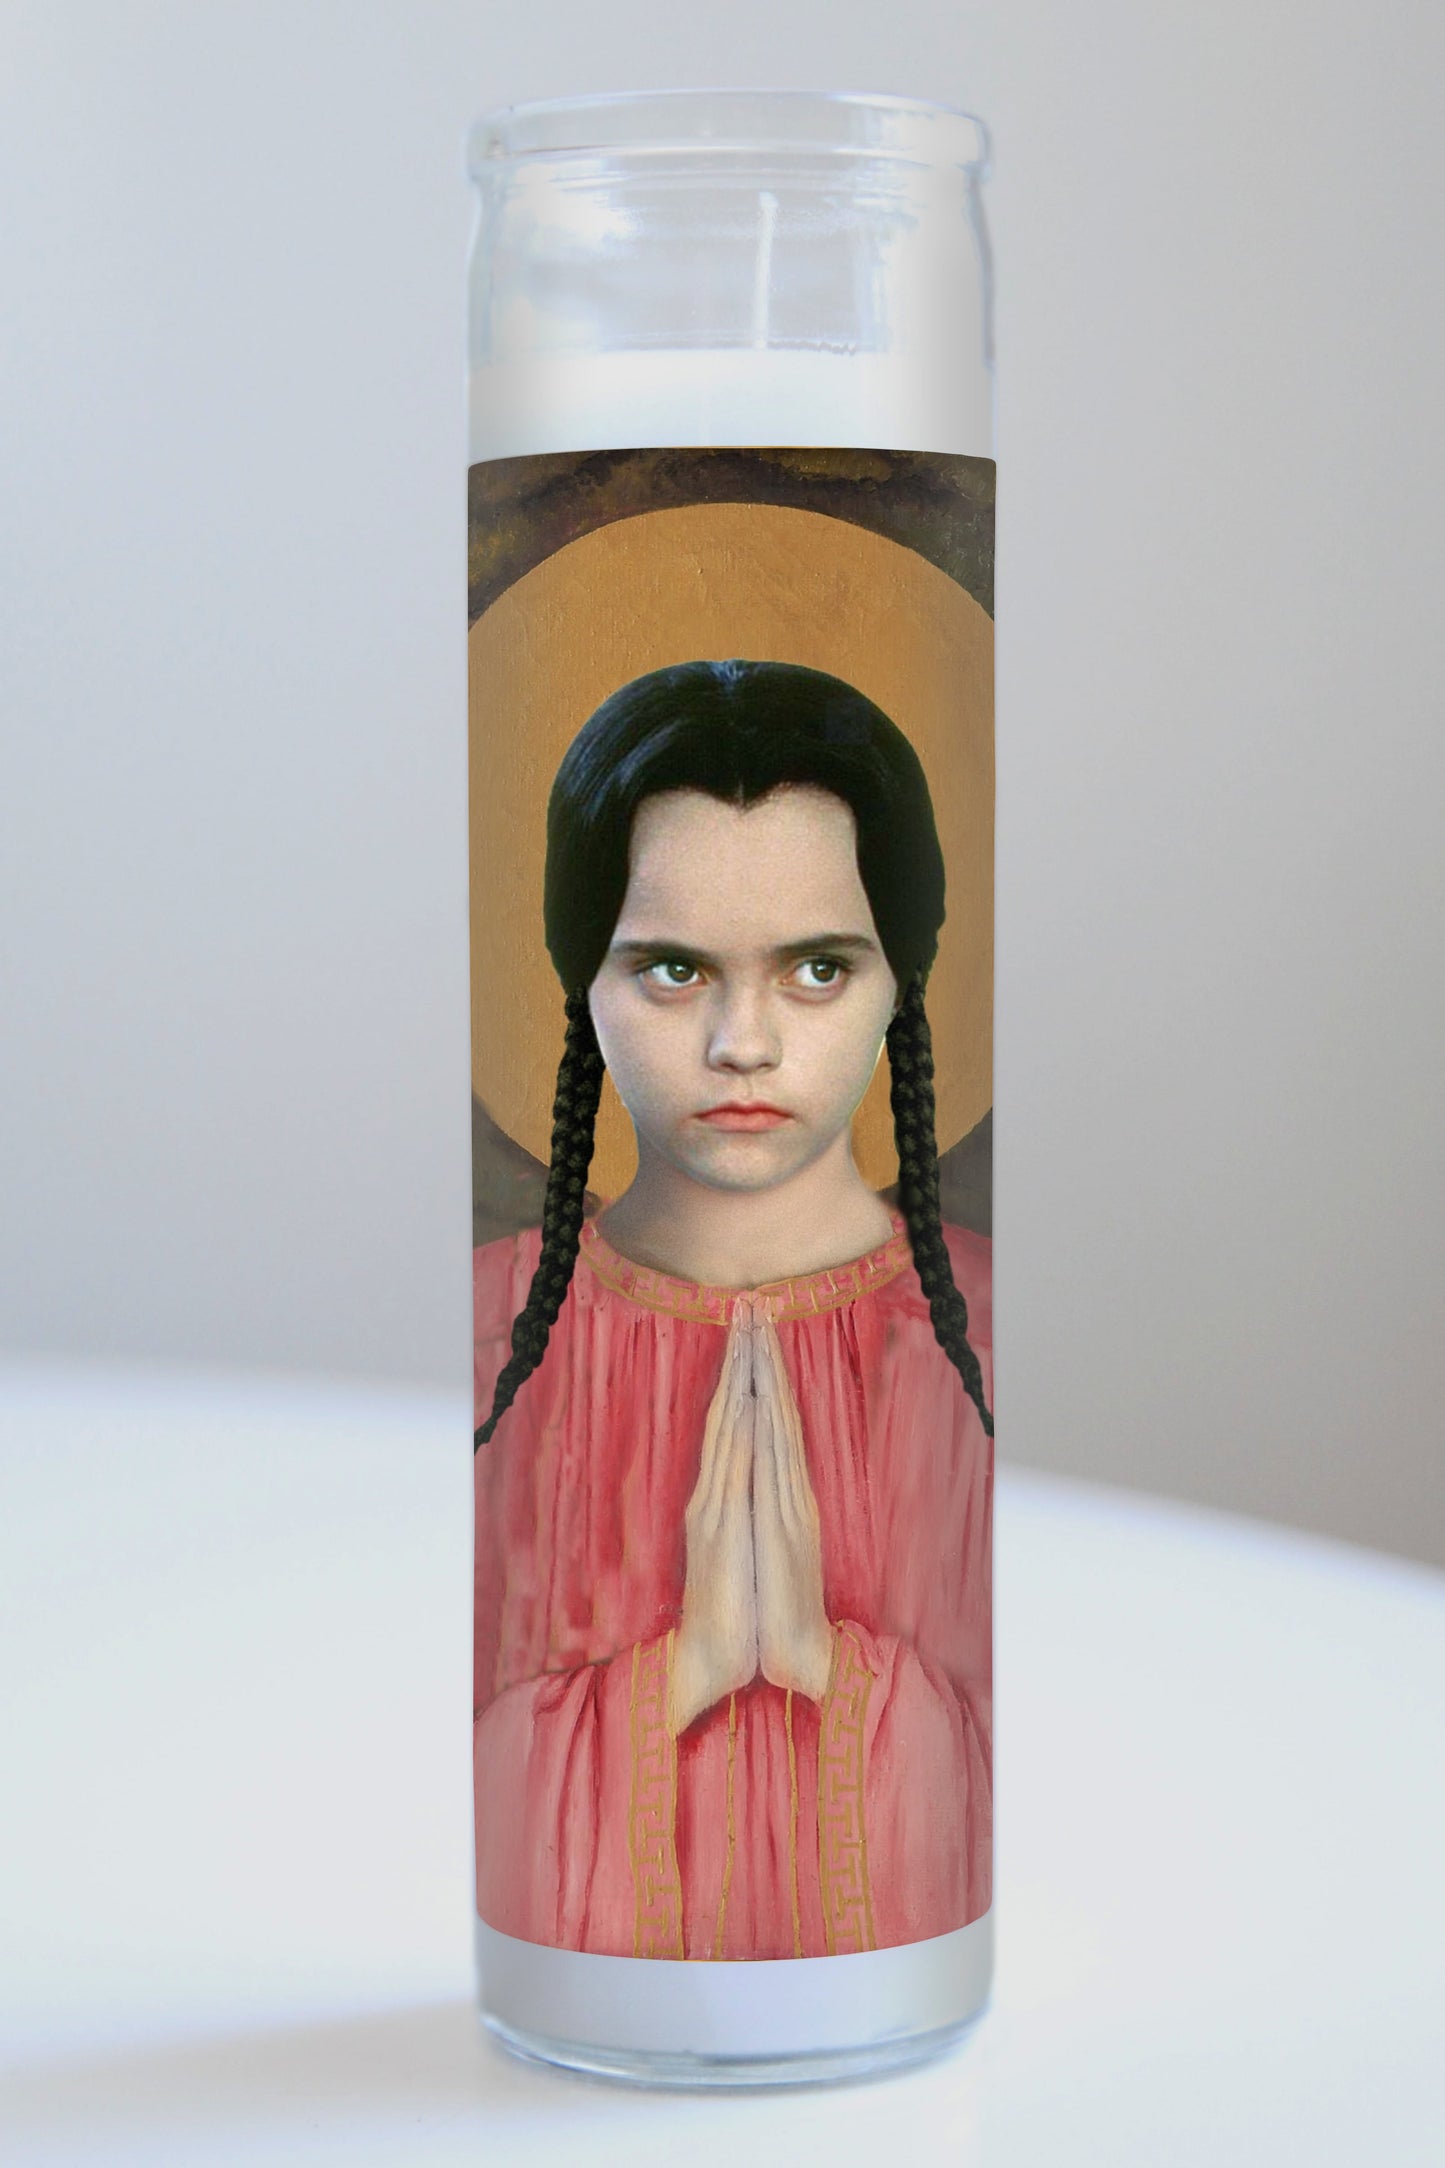 Wednesday Addams (Addams Family) Pink Robe Candle